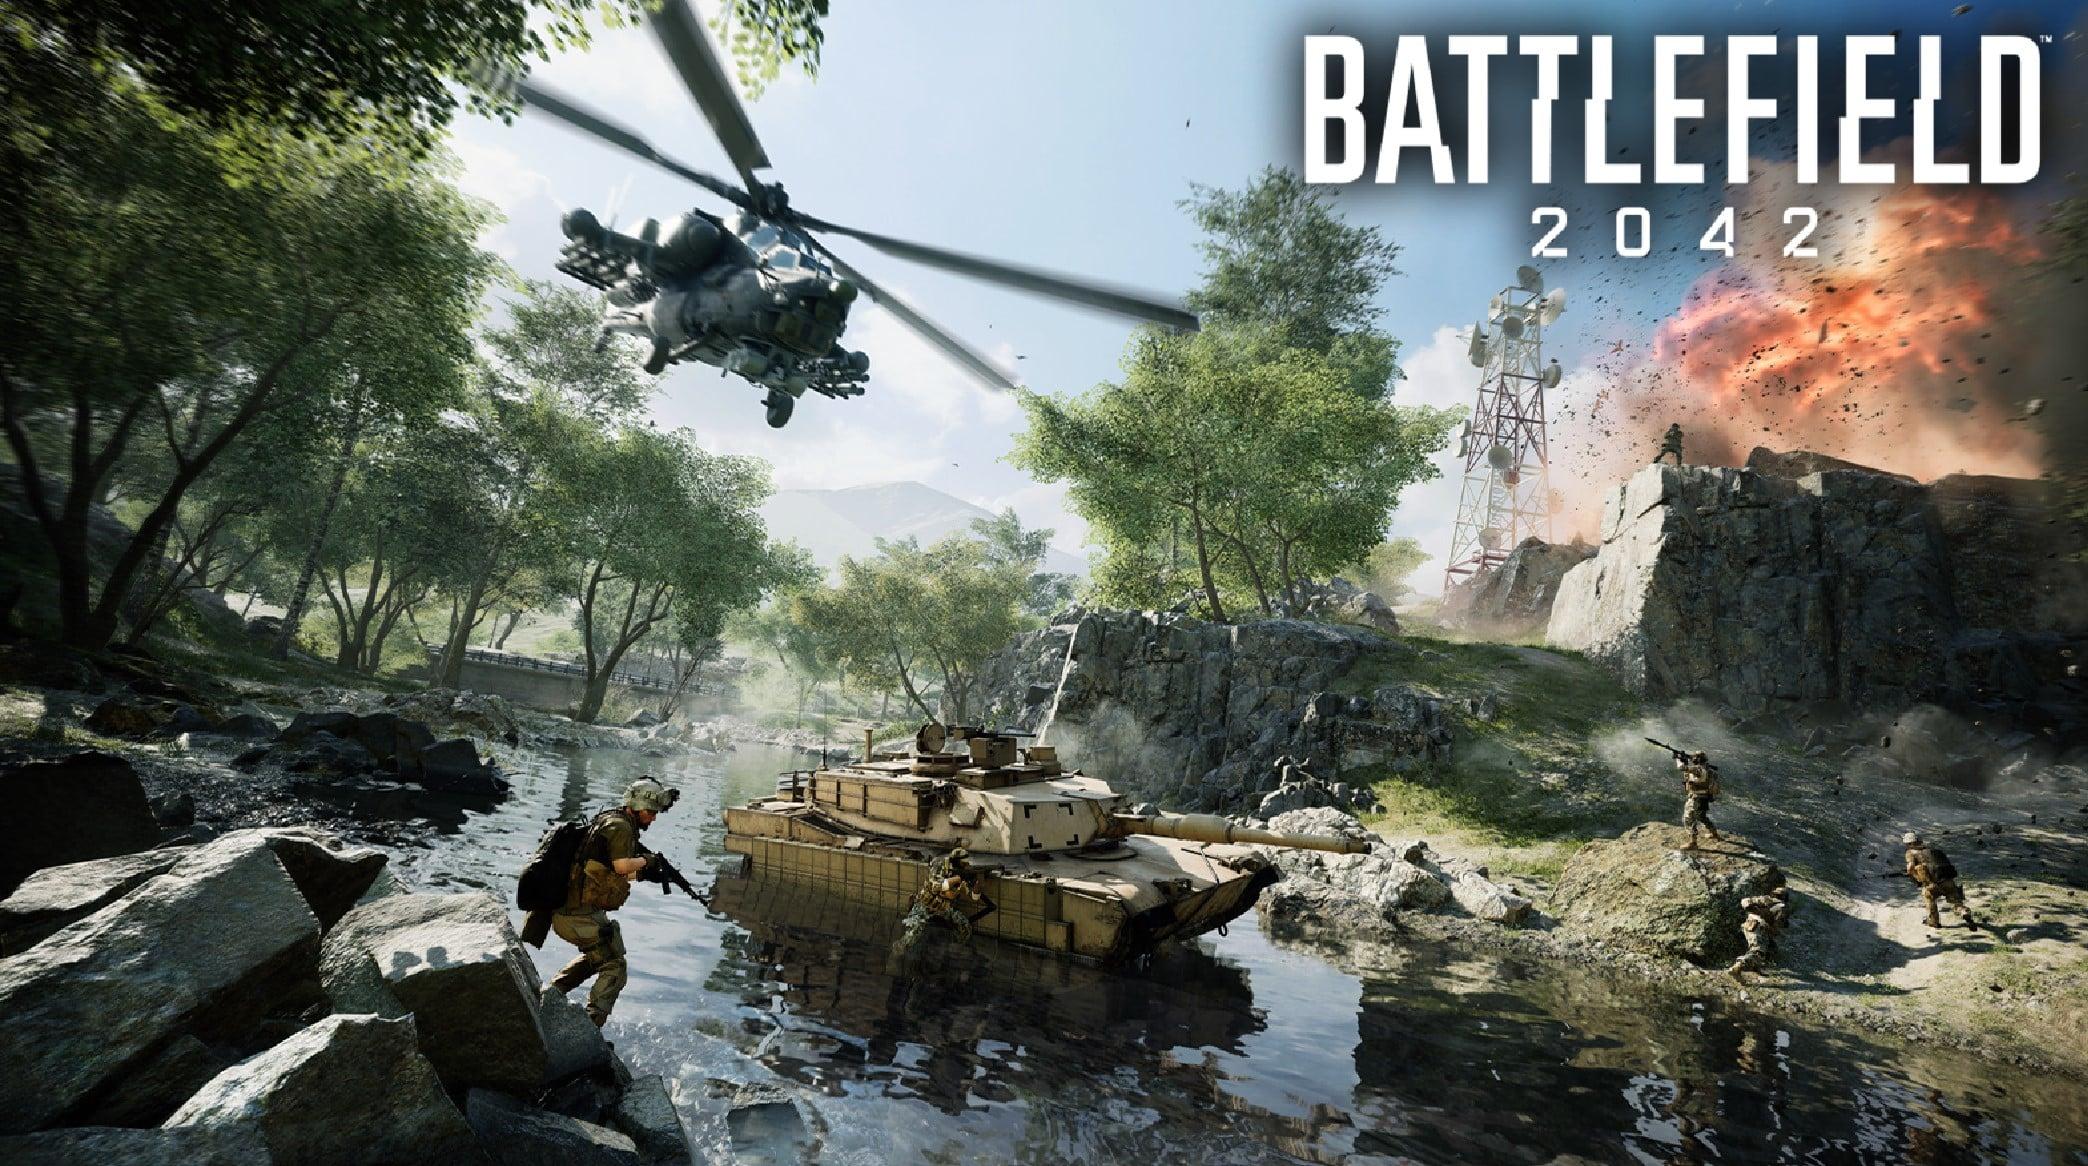 Battlefield 2042 Update 5.0.1 Patch Notes Released, Download Out June 21 -  MP1st